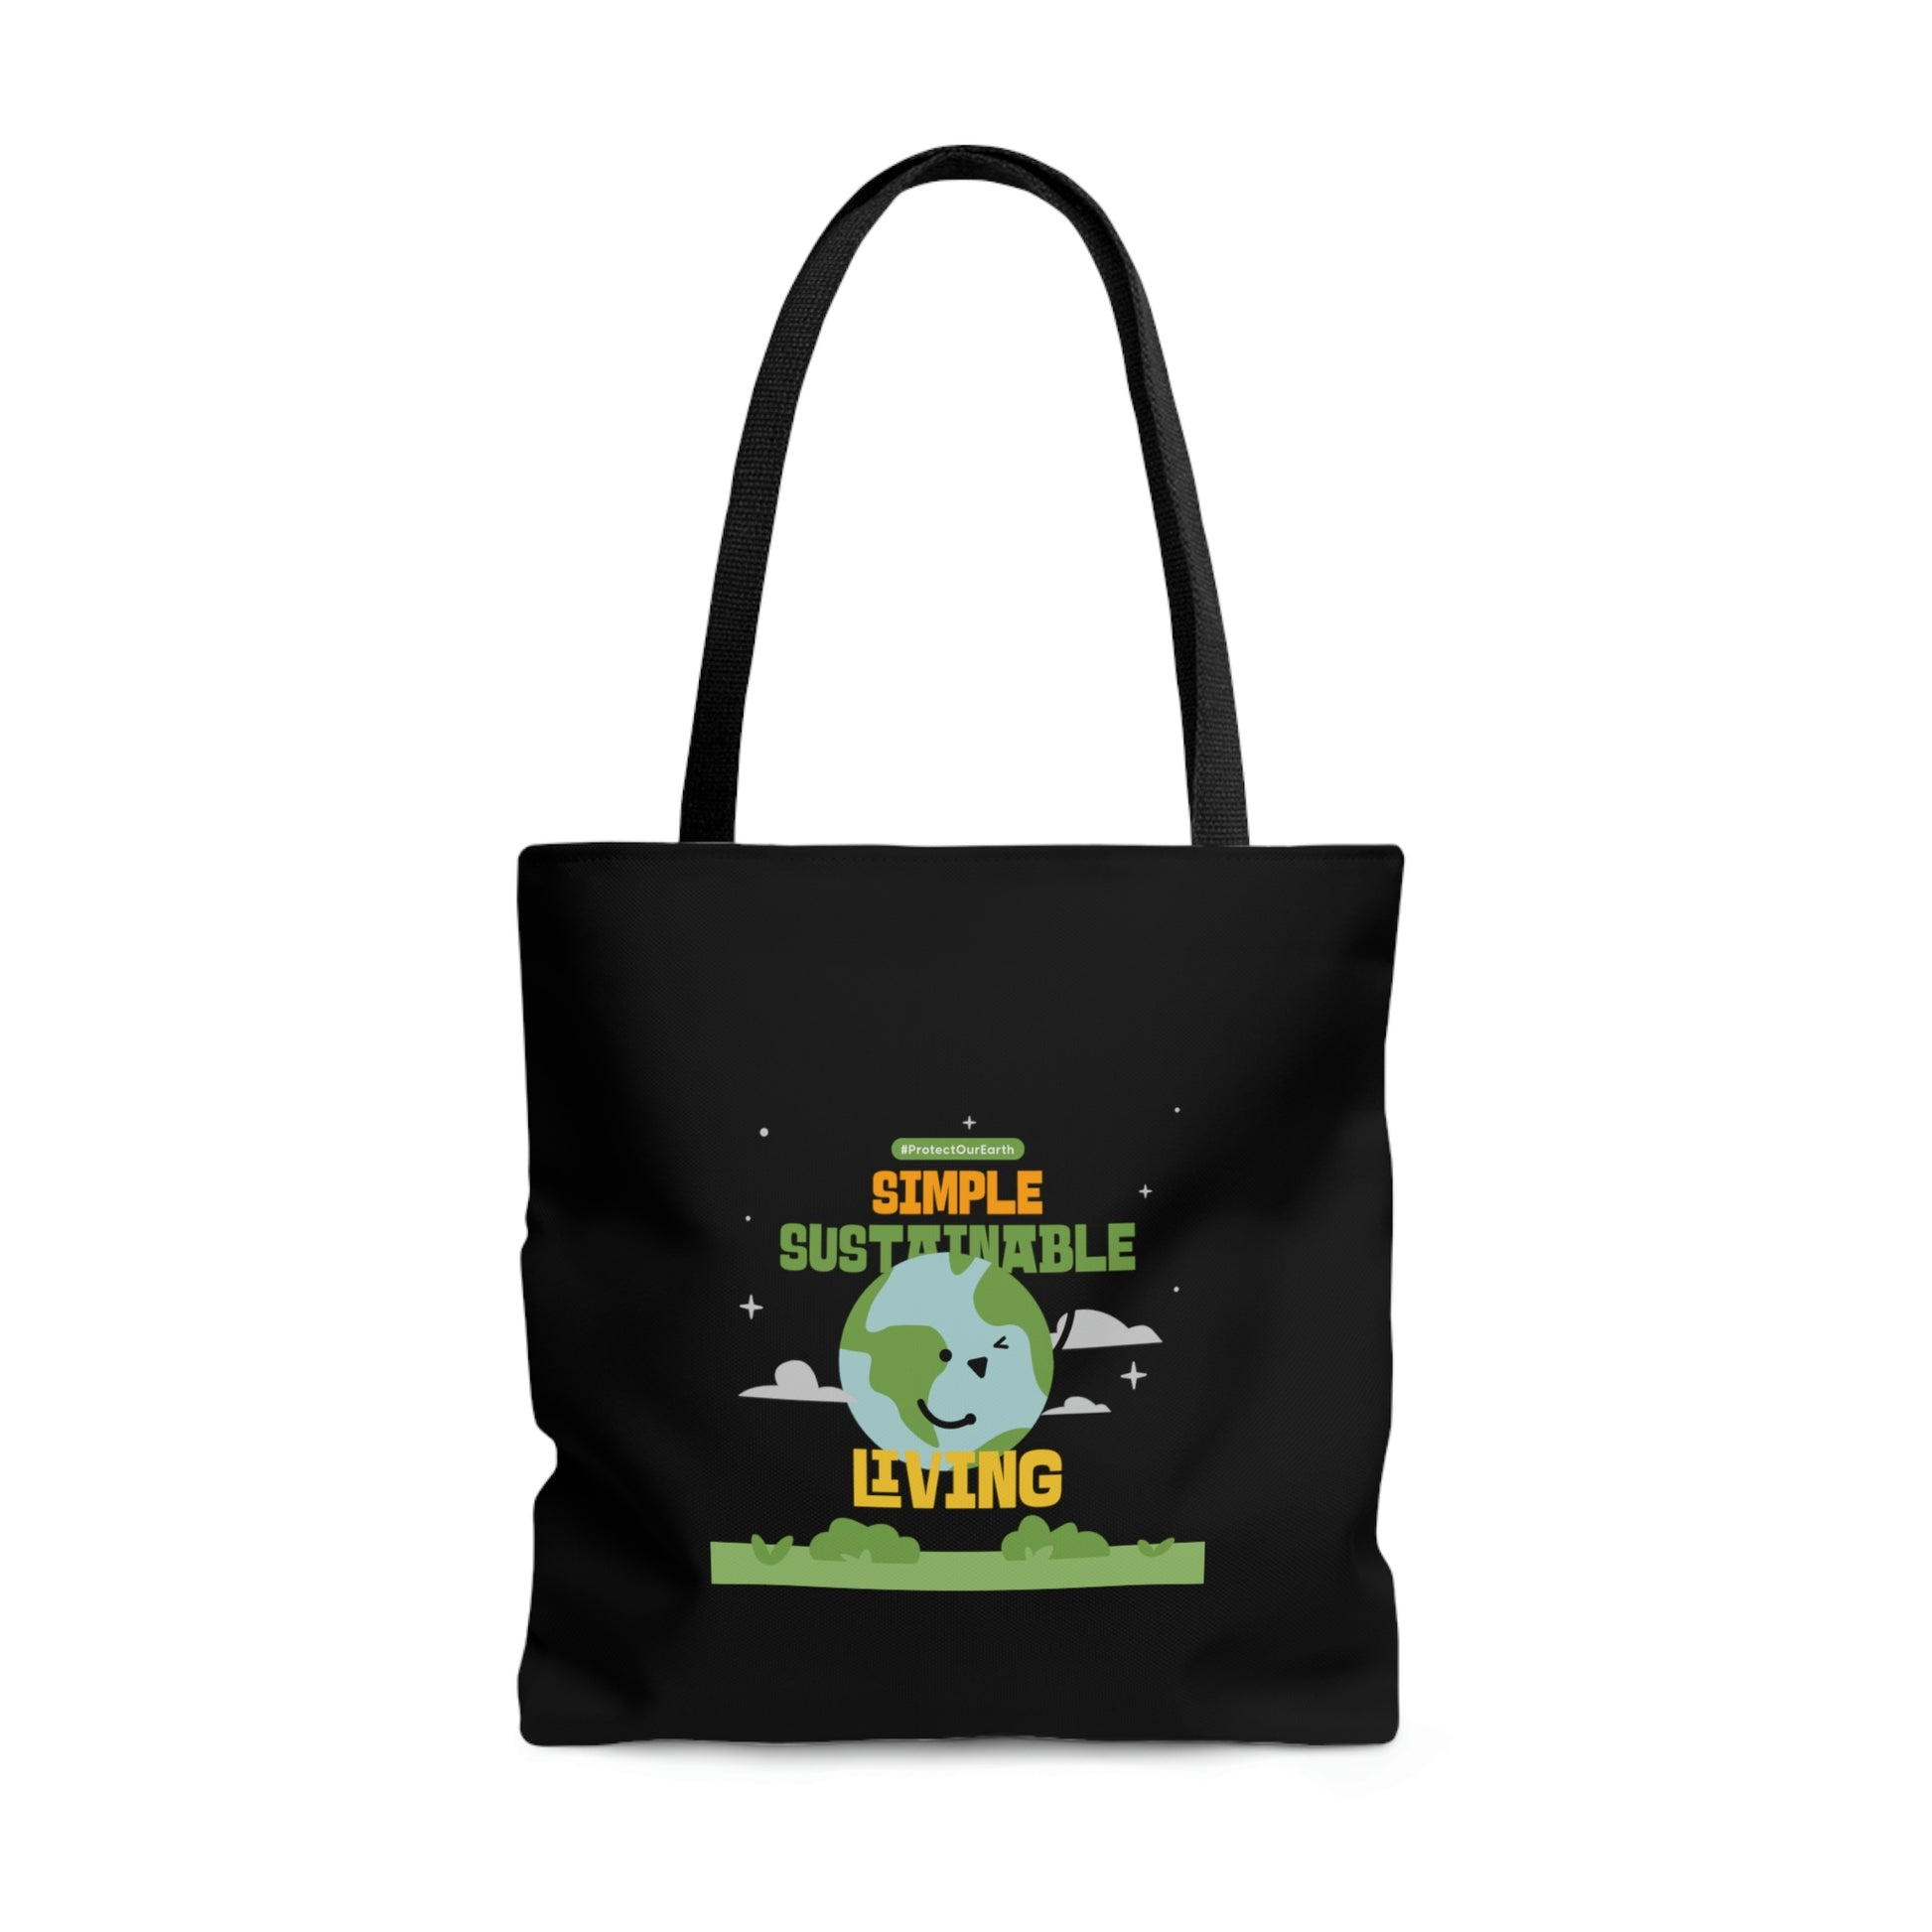 Tote bag front - all sizes